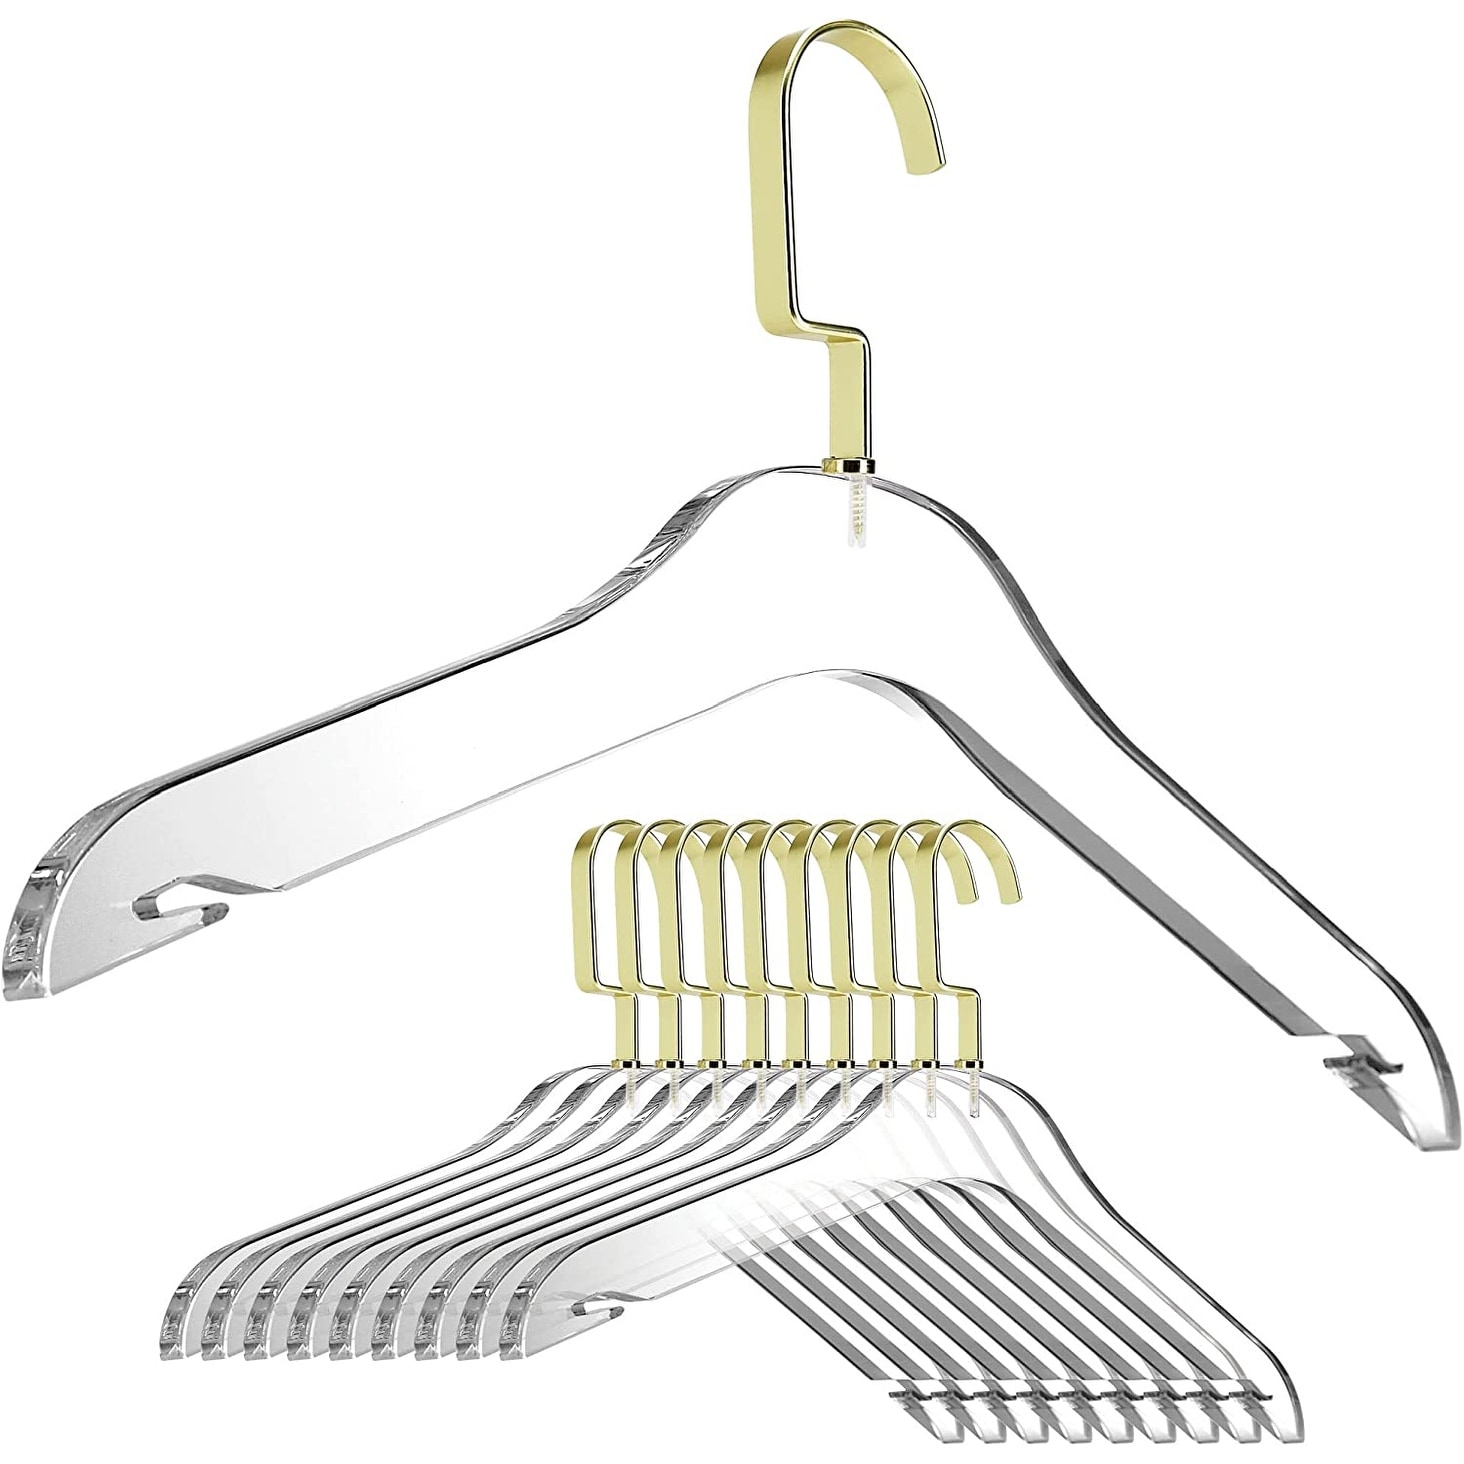 https://ak1.ostkcdn.com/images/products/is/images/direct/d4be48cfac85b27d4df99ab9b9b115b7b0fb688c/DesignStyles-Clear-Acrylic-Clothes-Hangers---10-Pk.jpg